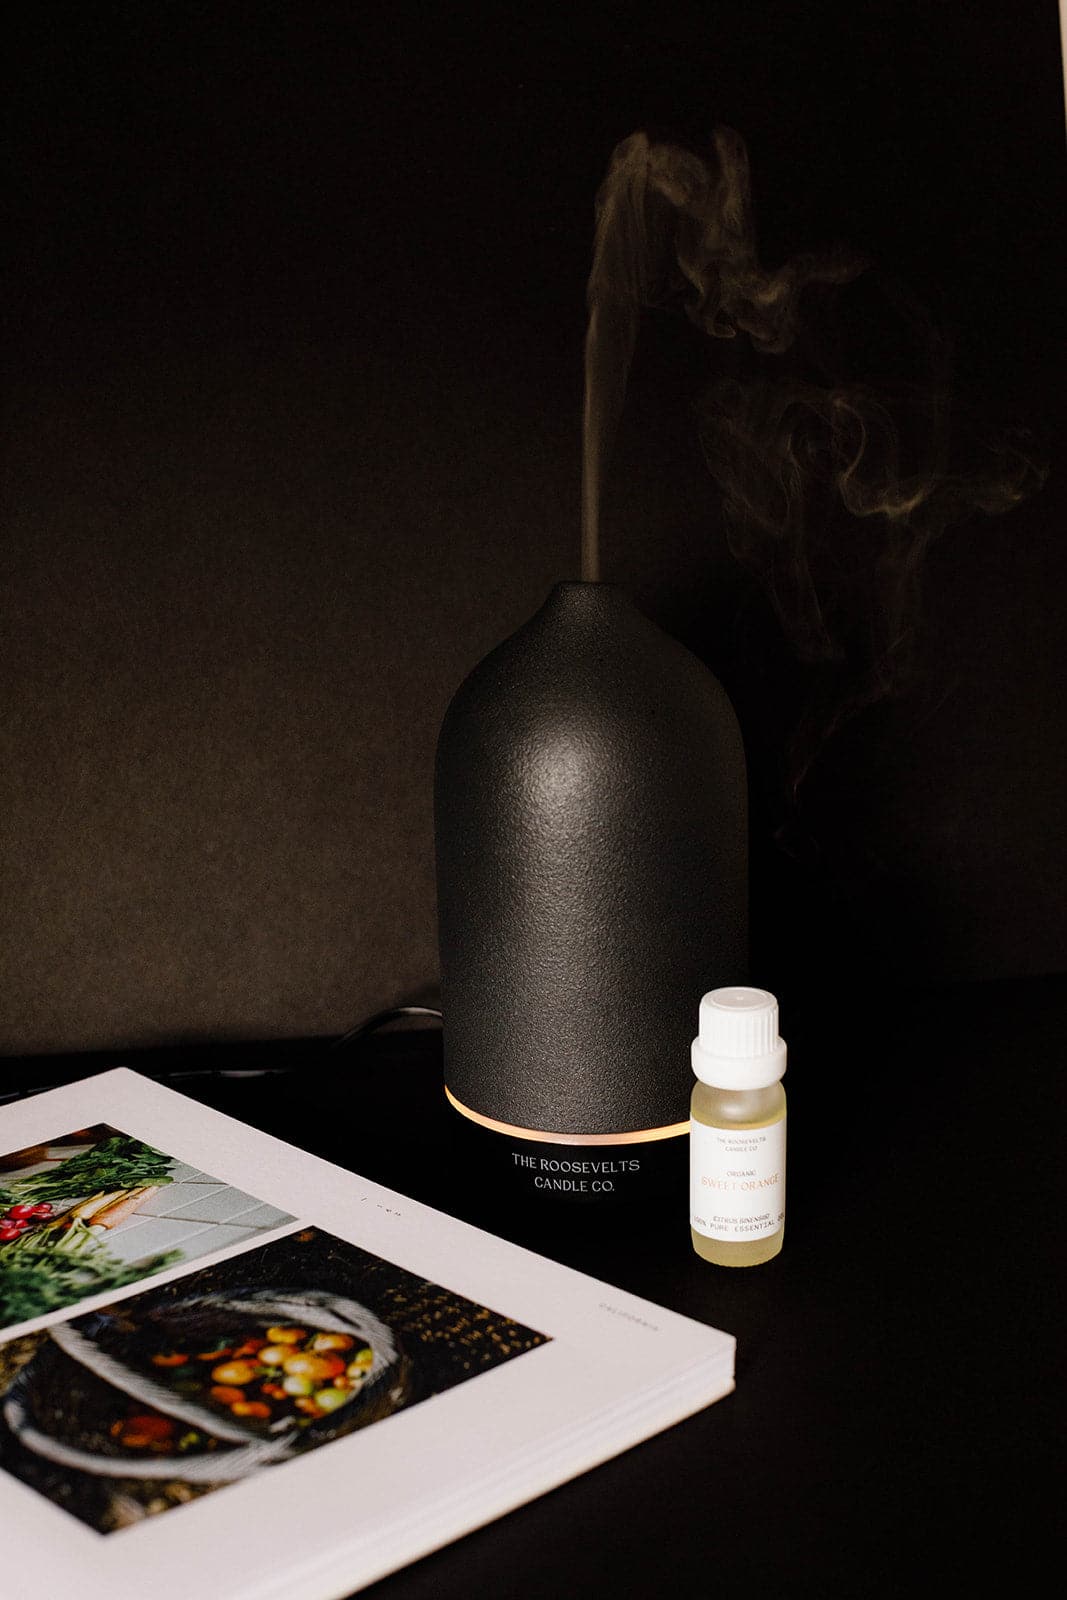 Stone Aromatic Diffuser - The Roosevelts Candle Co.